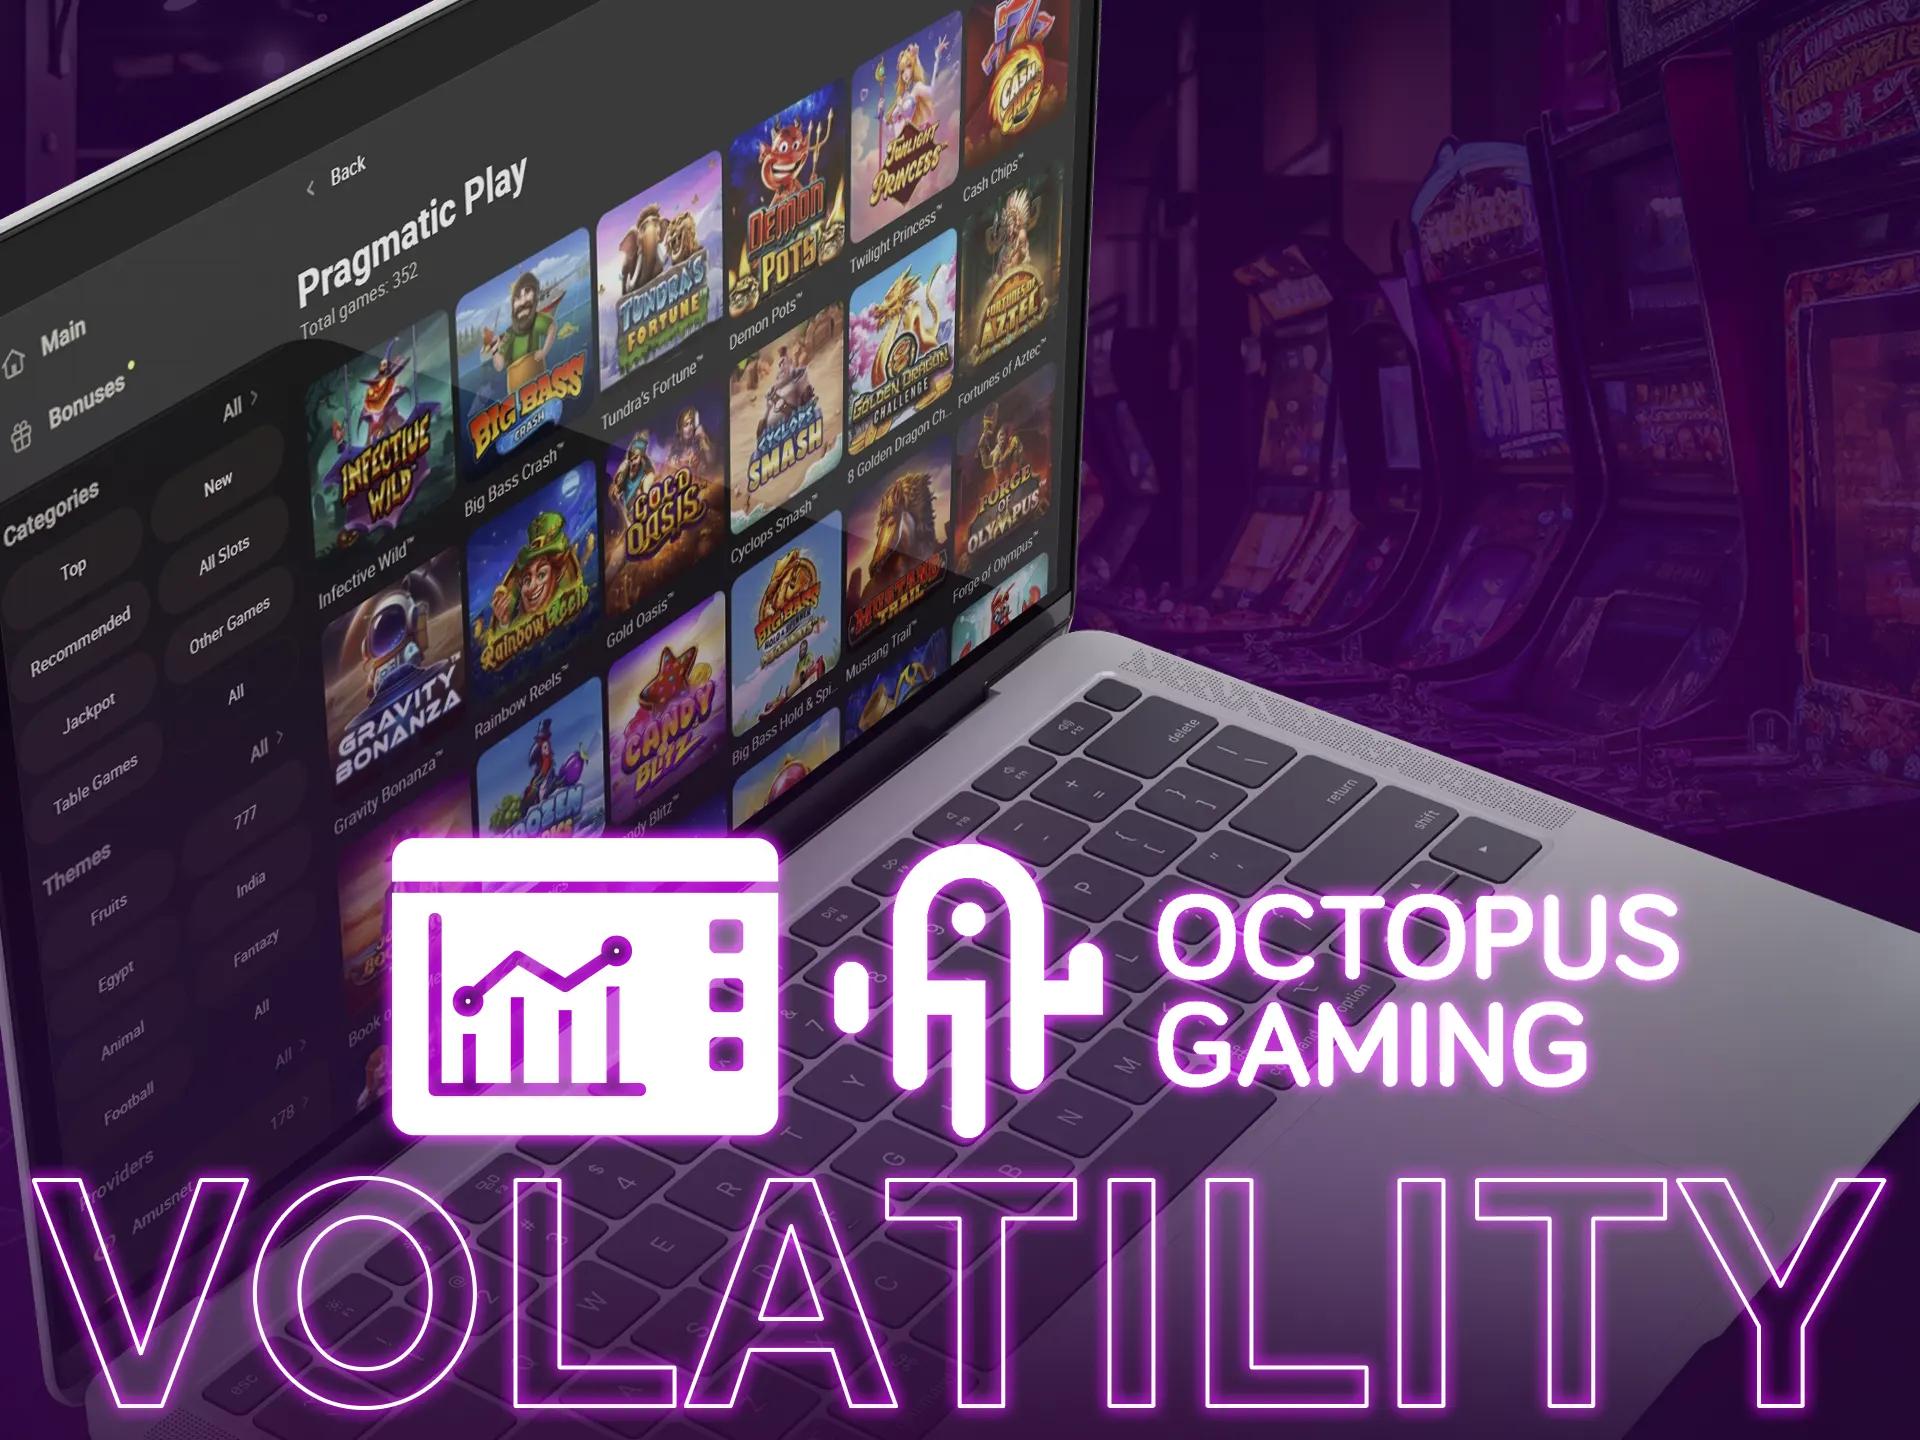 Enjoy high volatility rates with Octopus Gaming!